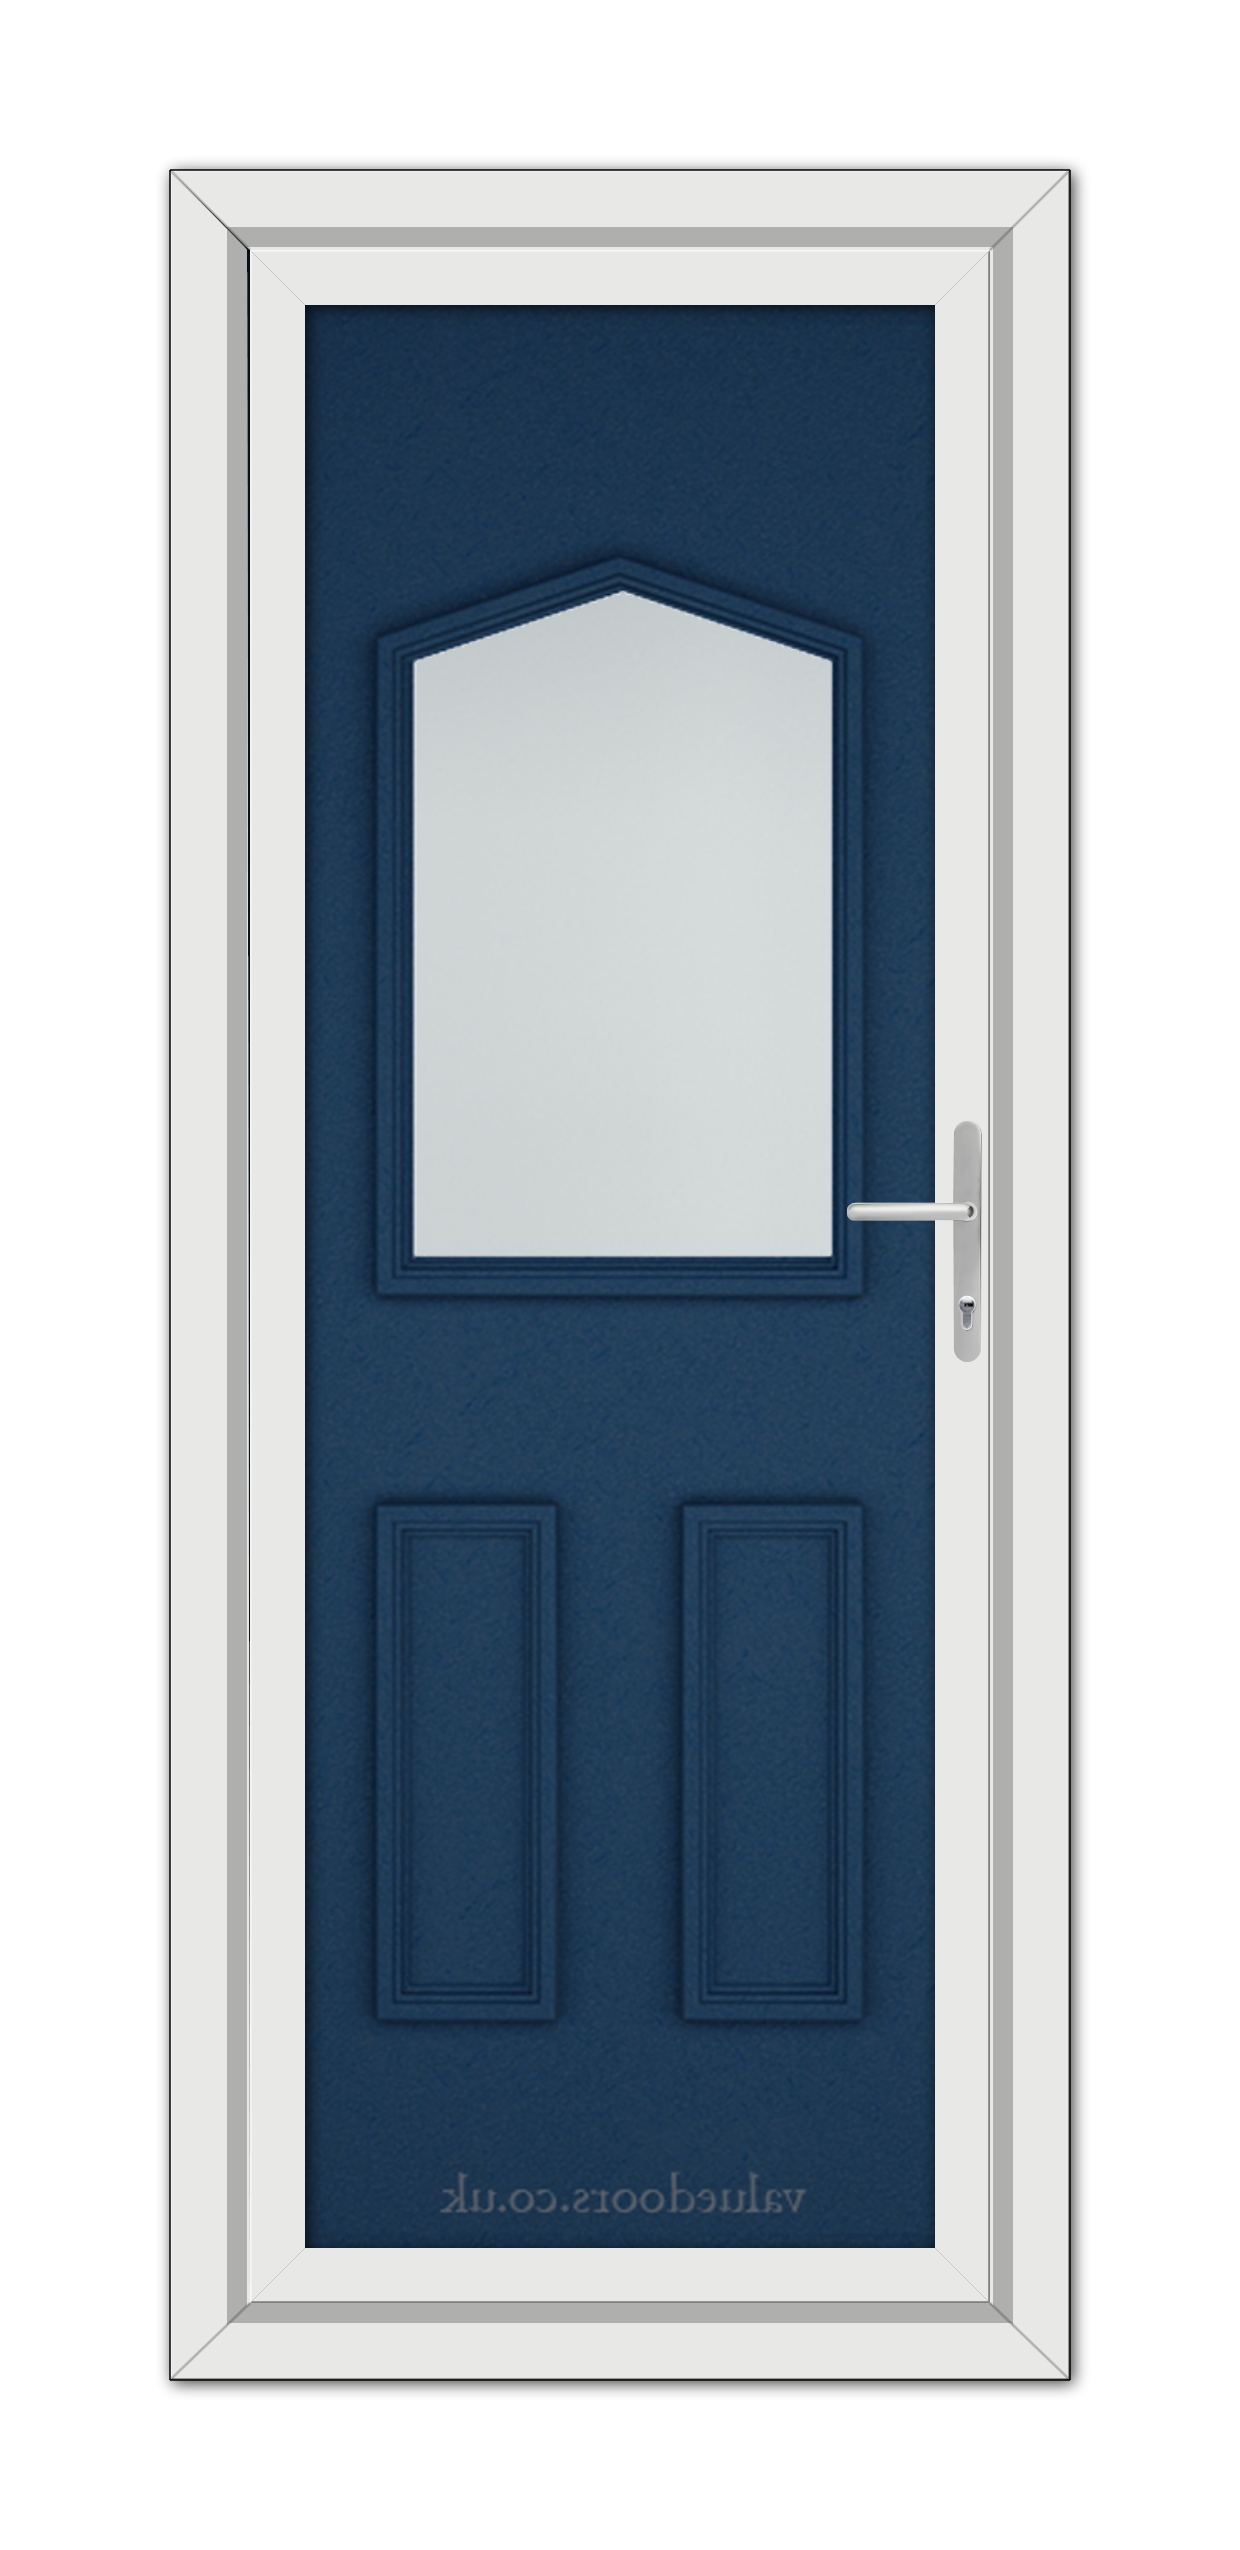 A vertical image of a closed Blue Oxford uPVC Door with an arched window at the top and two recessed panels, set in a white frame.